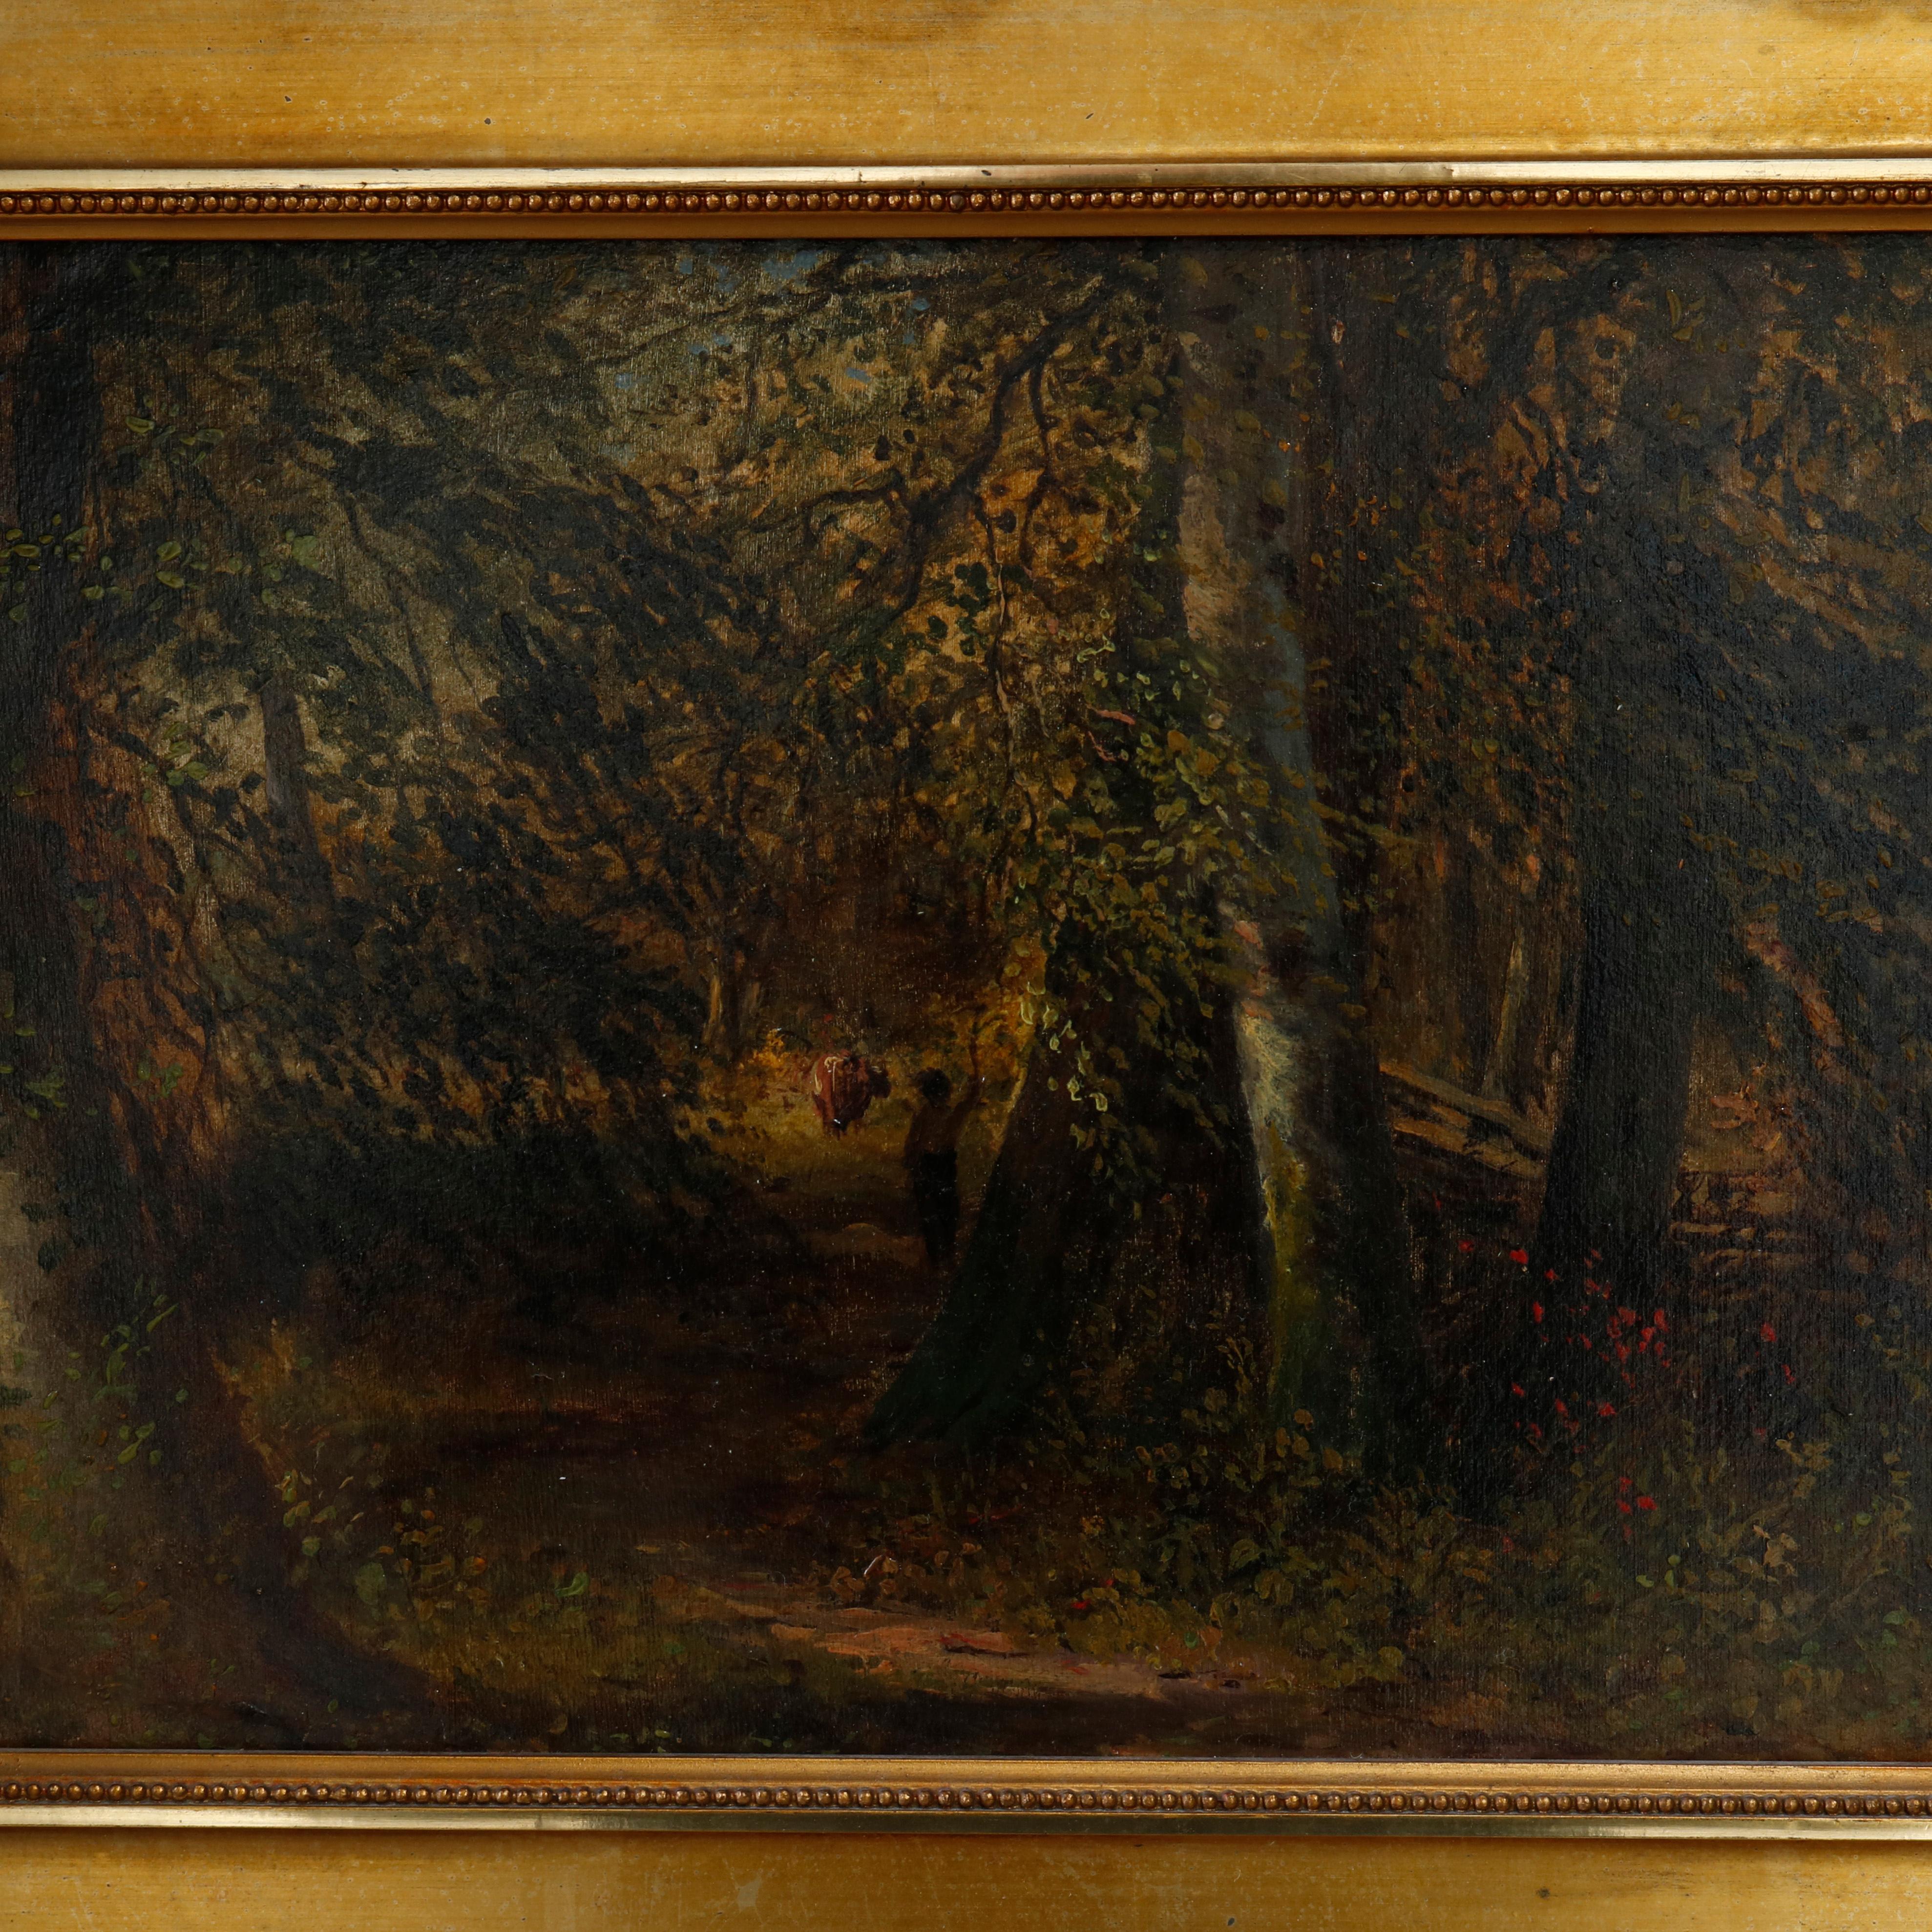 Carved Antique Painting of Forest Landscape with Figures, Ornate Giltwood Frame, c 1890